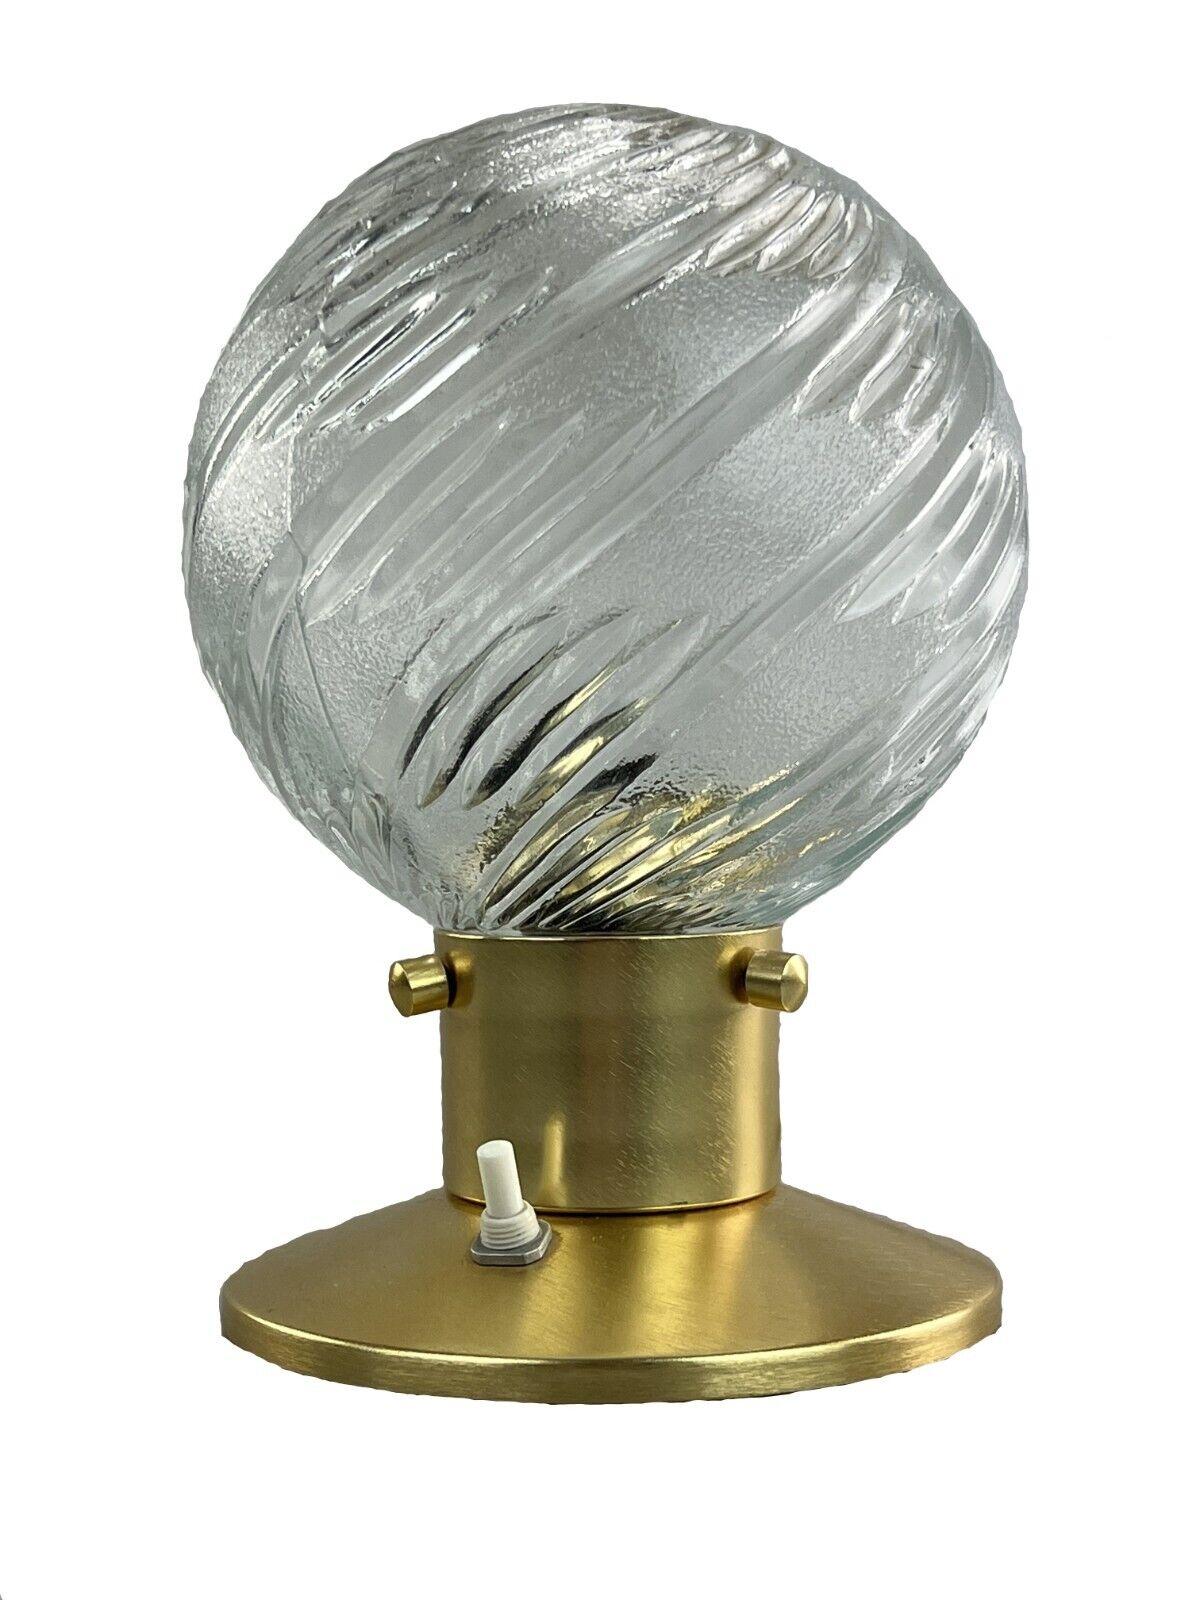 60s 70s ball lamp light table lamp bedside lamp space age design

Object: table lamp

Manufacturer:

Condition: good

Age: around 1960-1970

Dimensions:

Diameter = 16cm
Height = 22cm

Other notes:

E14 socket

The pictures serve